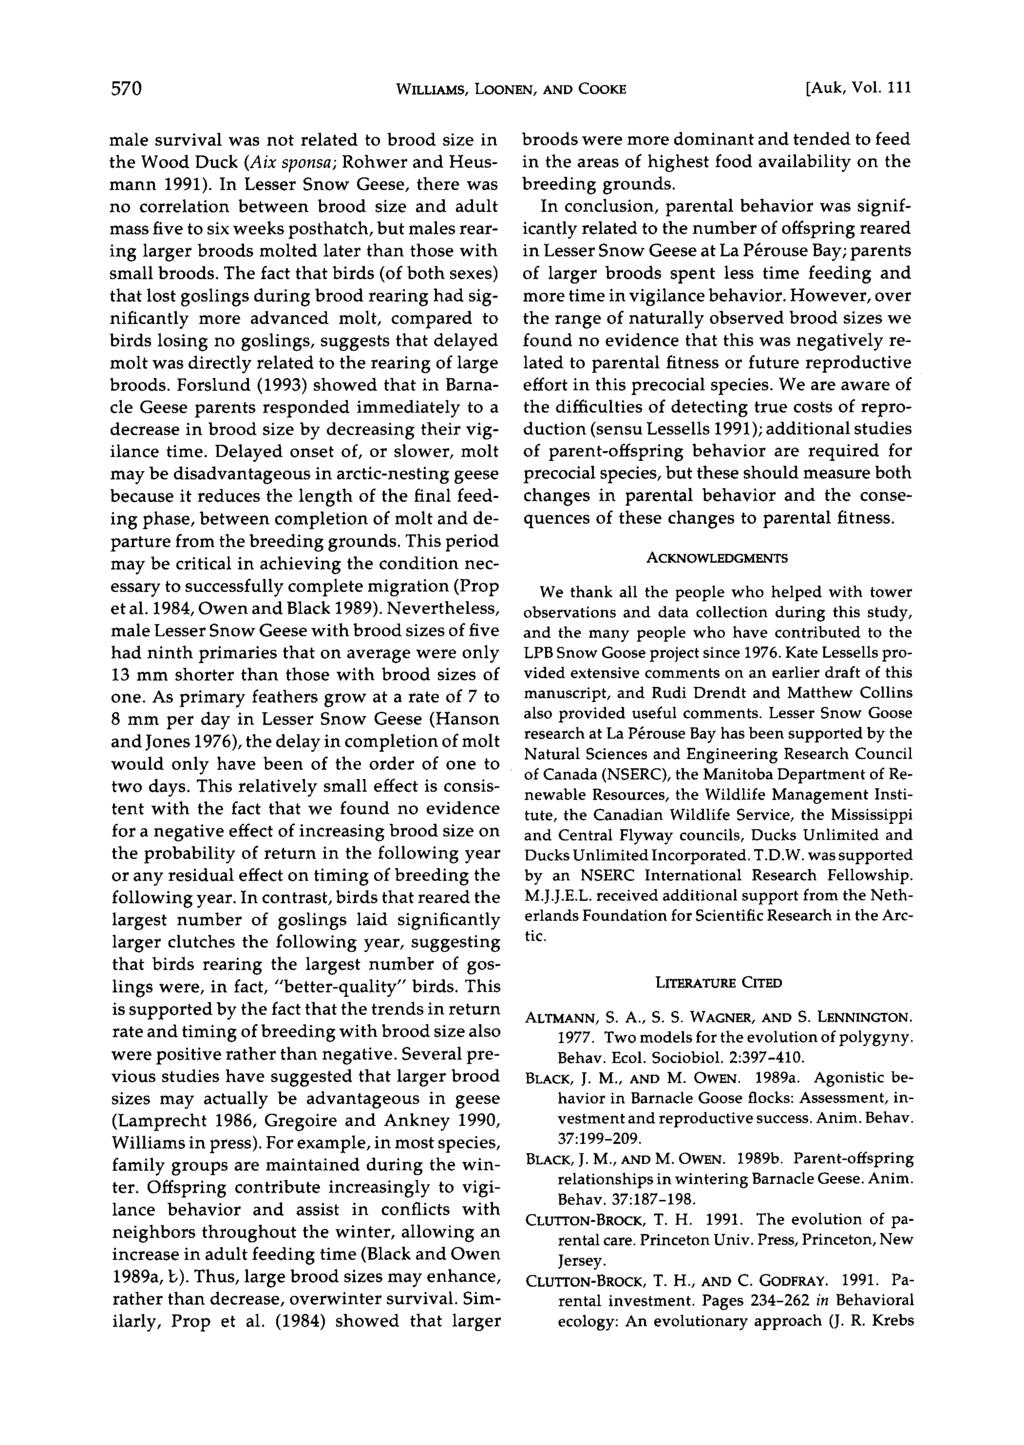 570 WILLIAMS, LOONEN, AND COOK [Auk, Vol. 111 male survival was not related to brood size in the Wood Duck (Aix sponsa; Rohwer and Heusmann 1991).